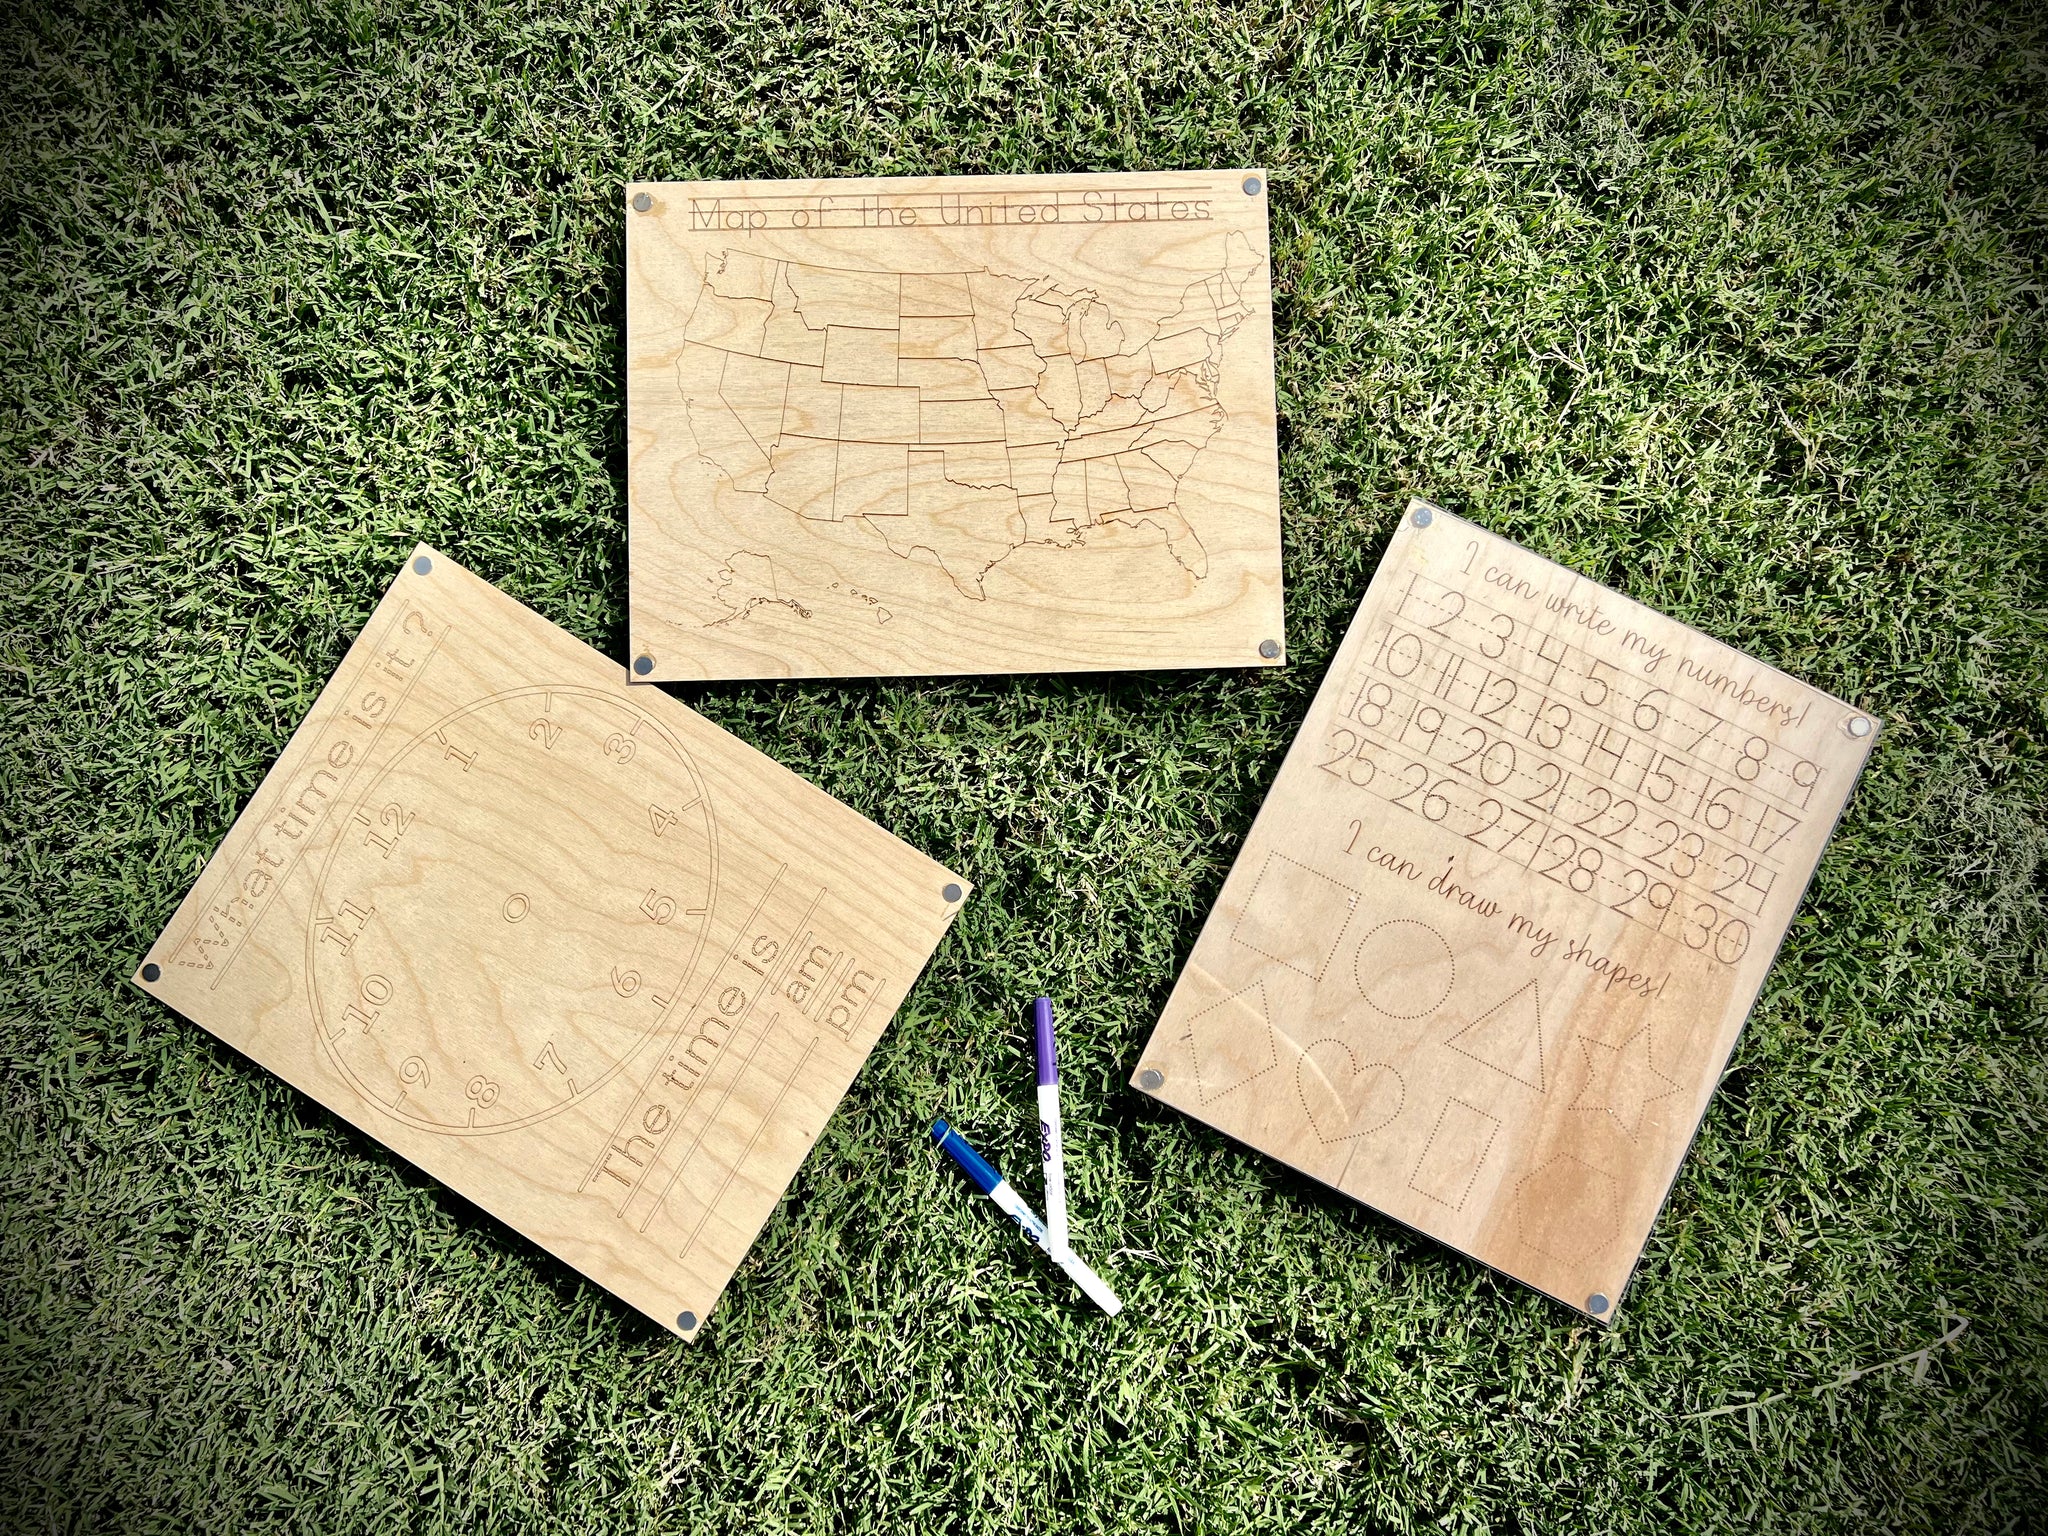 Tracing boards